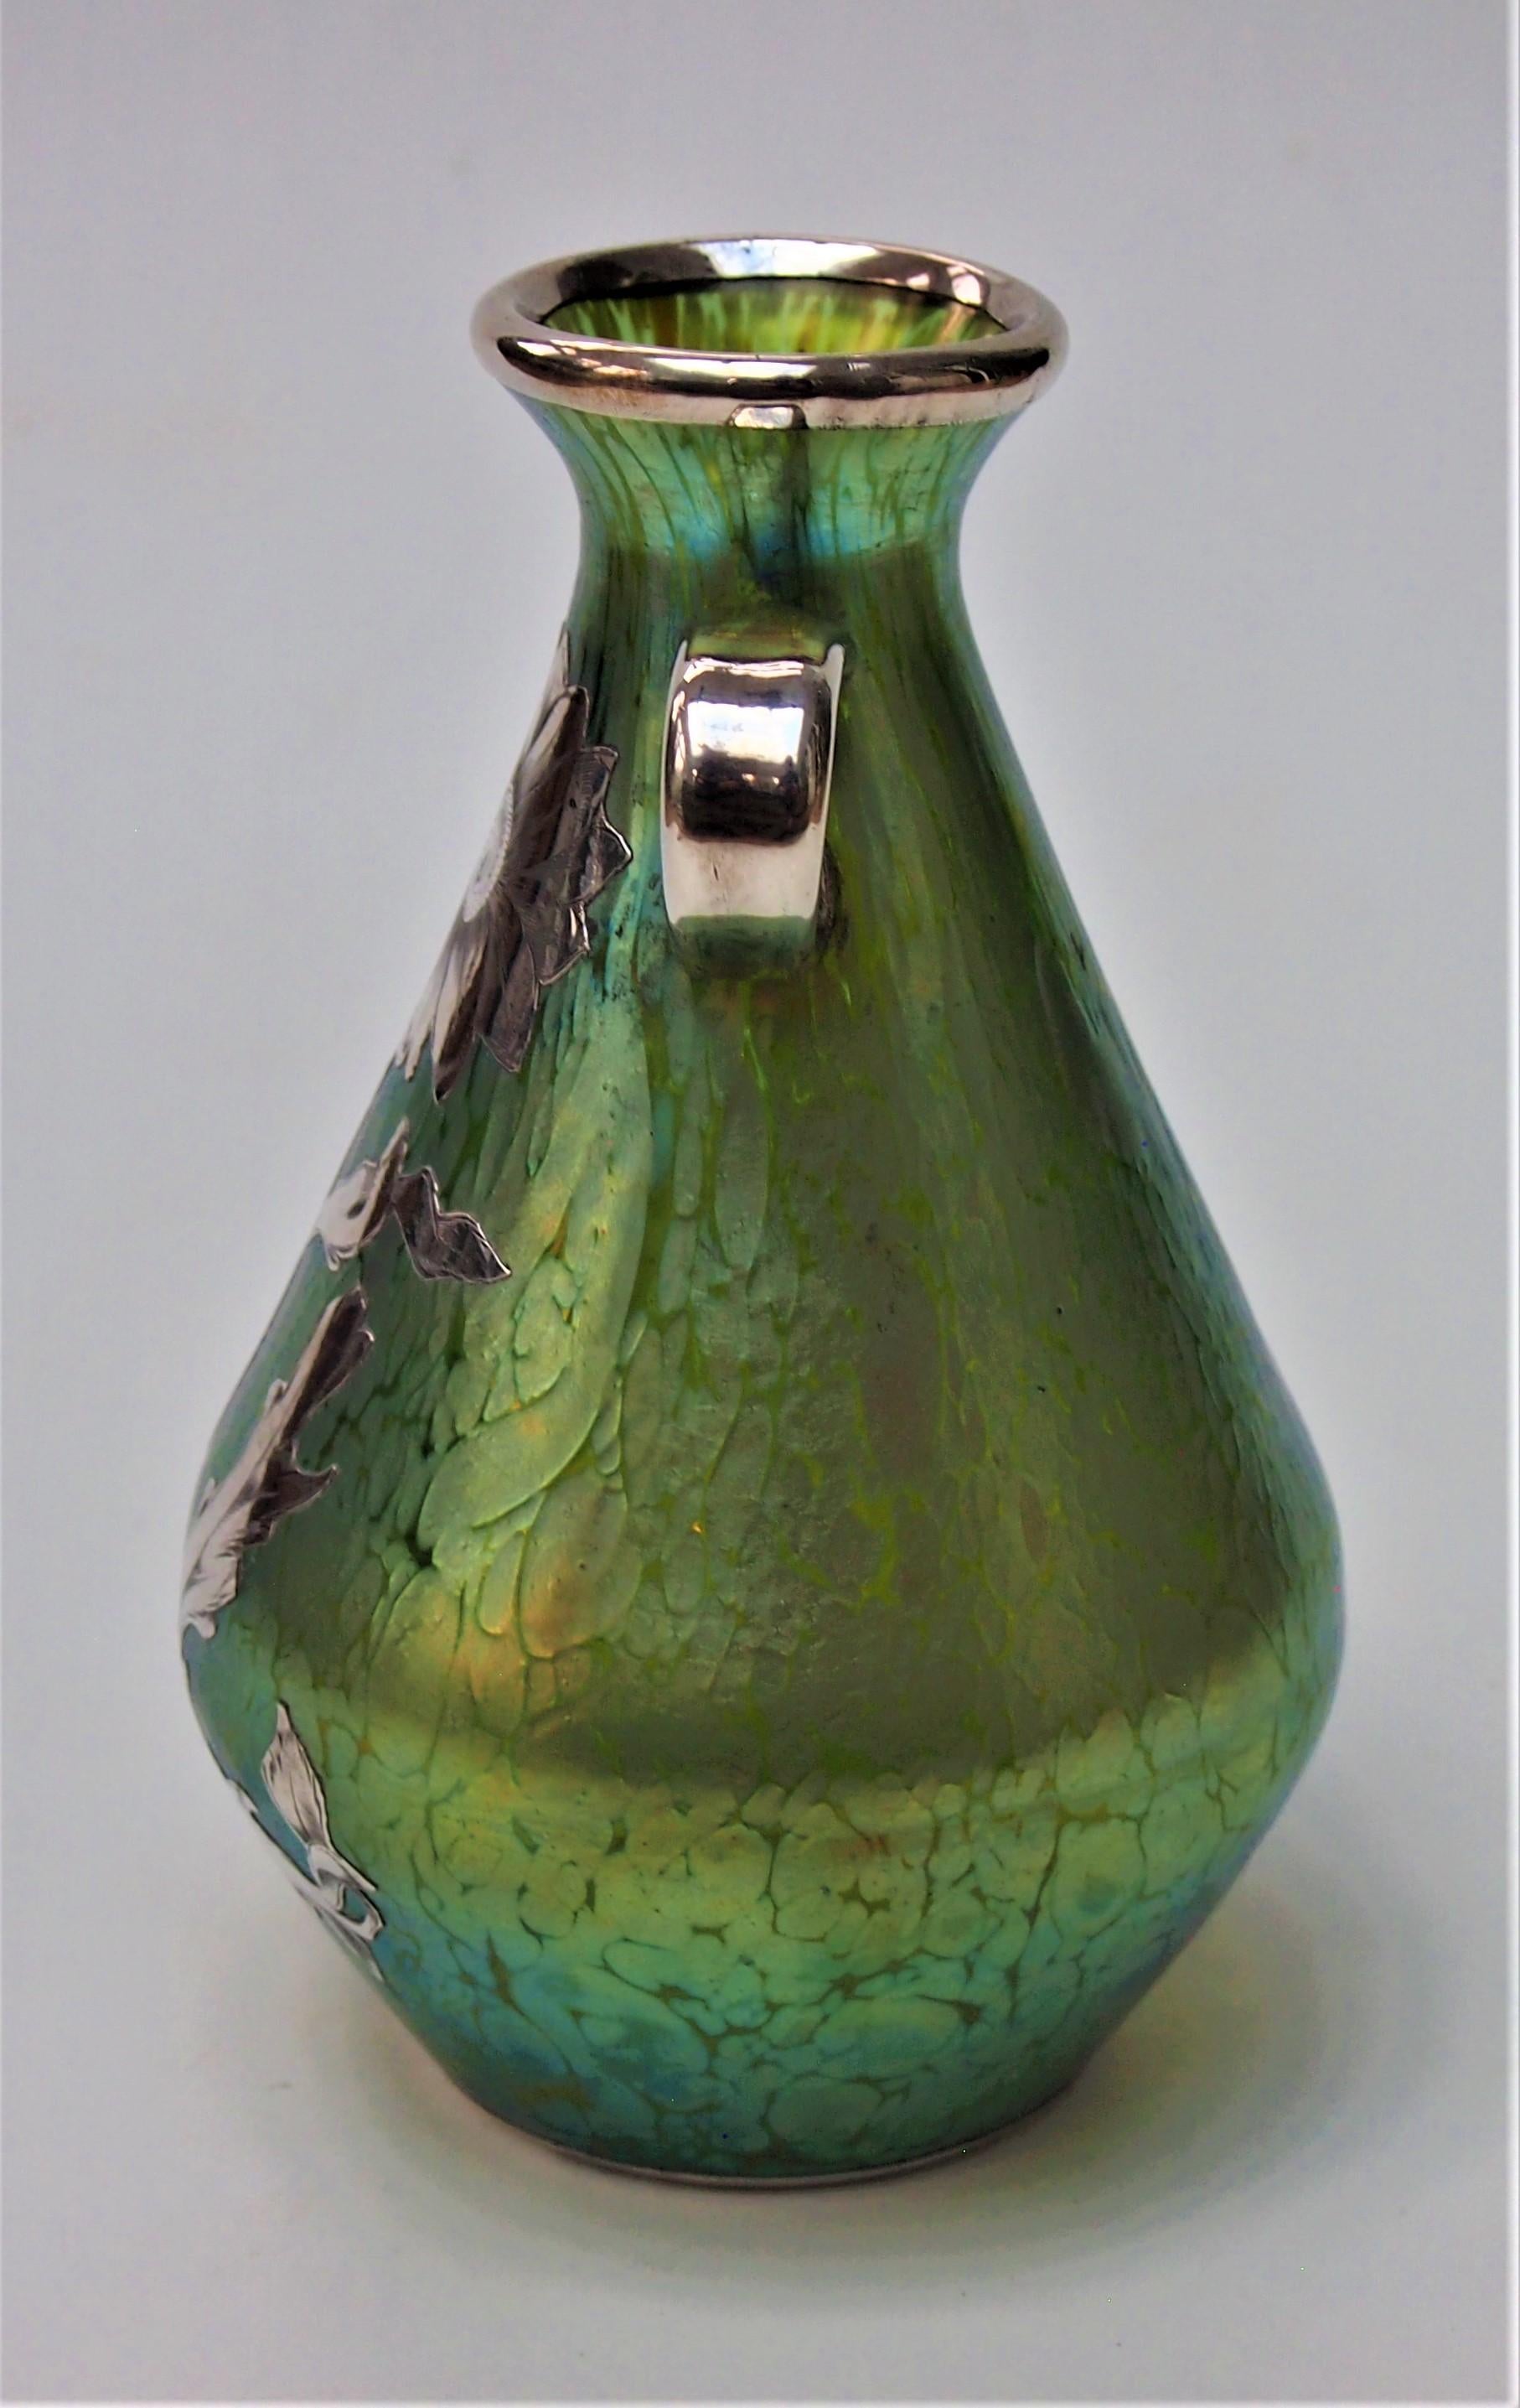 A fabulous Art Nouveau Loetz 'Crete' (blue/gold on green) Papillon (Butterfly wing) vase with applied handles and fine silver overlay. This iridised finish was first created by Loetz in 1898 and this is an early example. The fine silver overlay